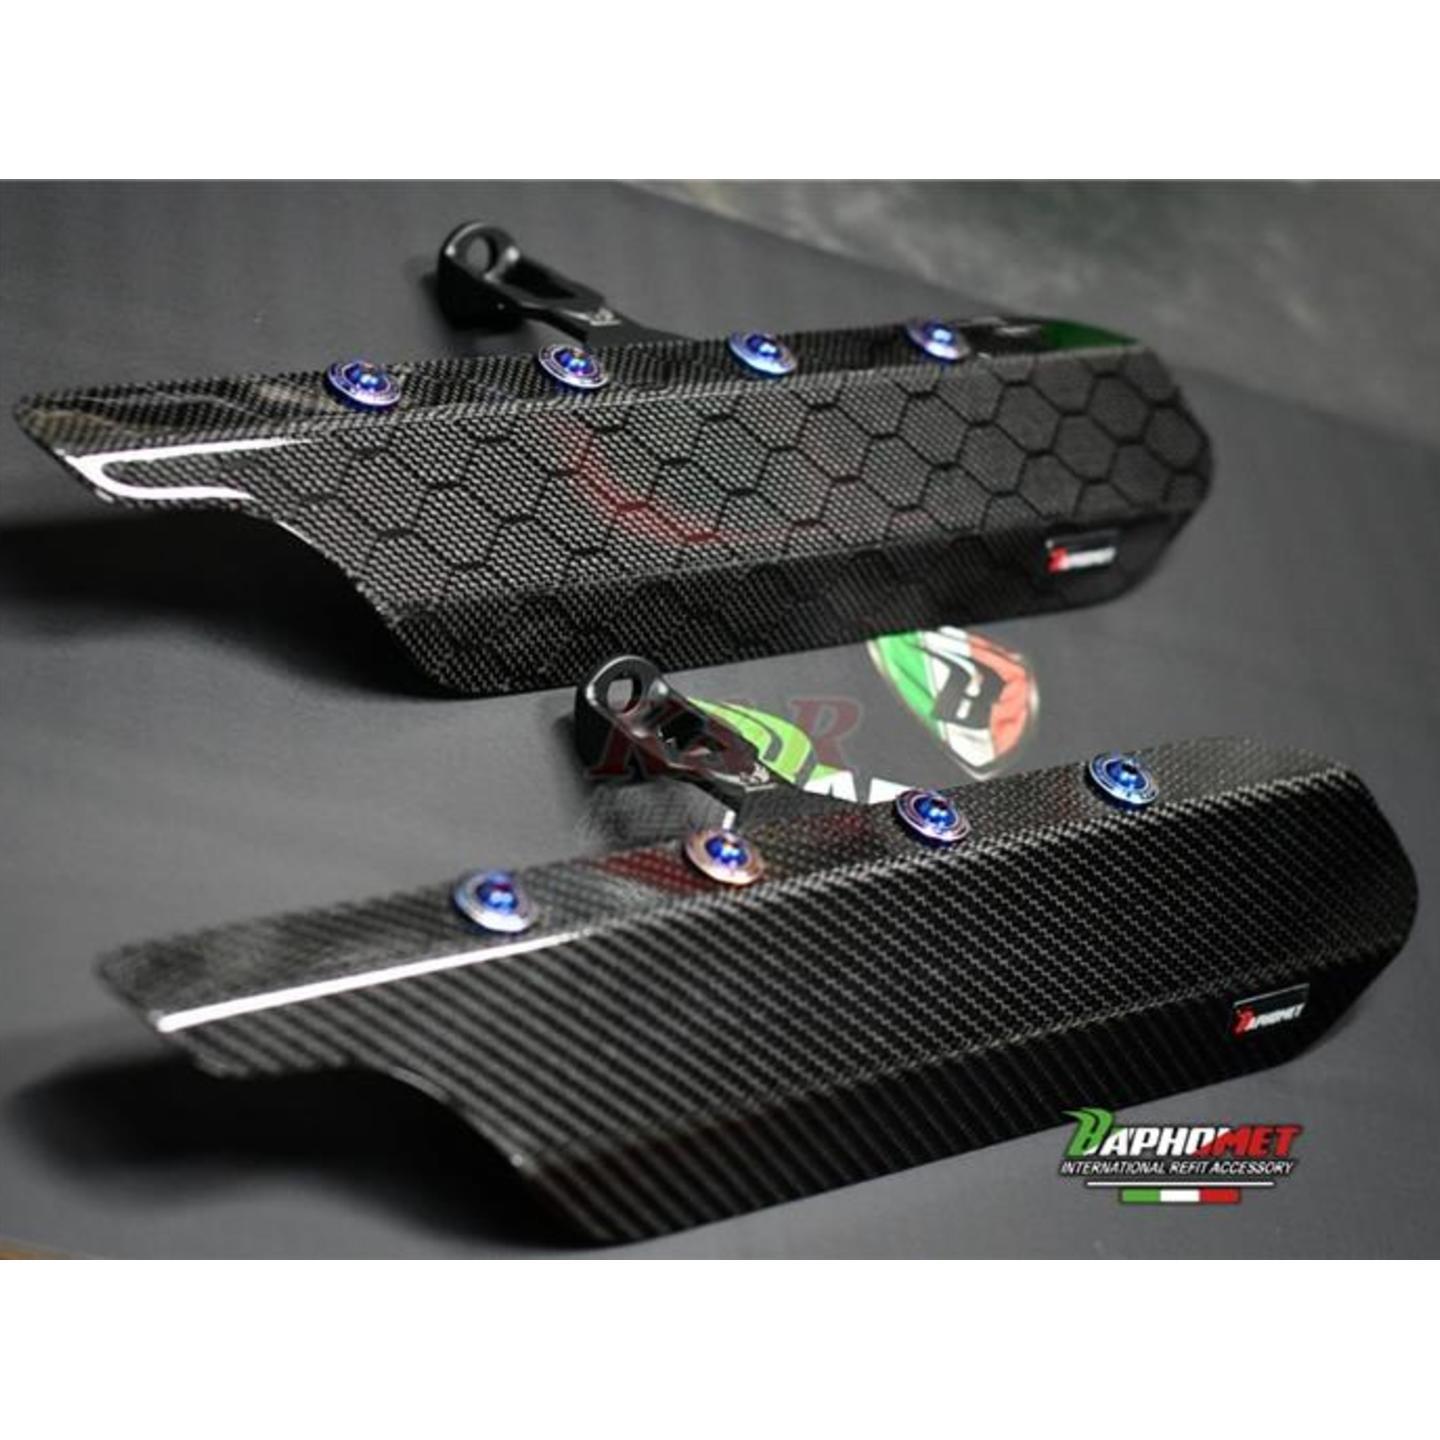 Yamaha TMAX530 Xmax300 carbon fiber exhaust anti scald cover protector shield guard sliders